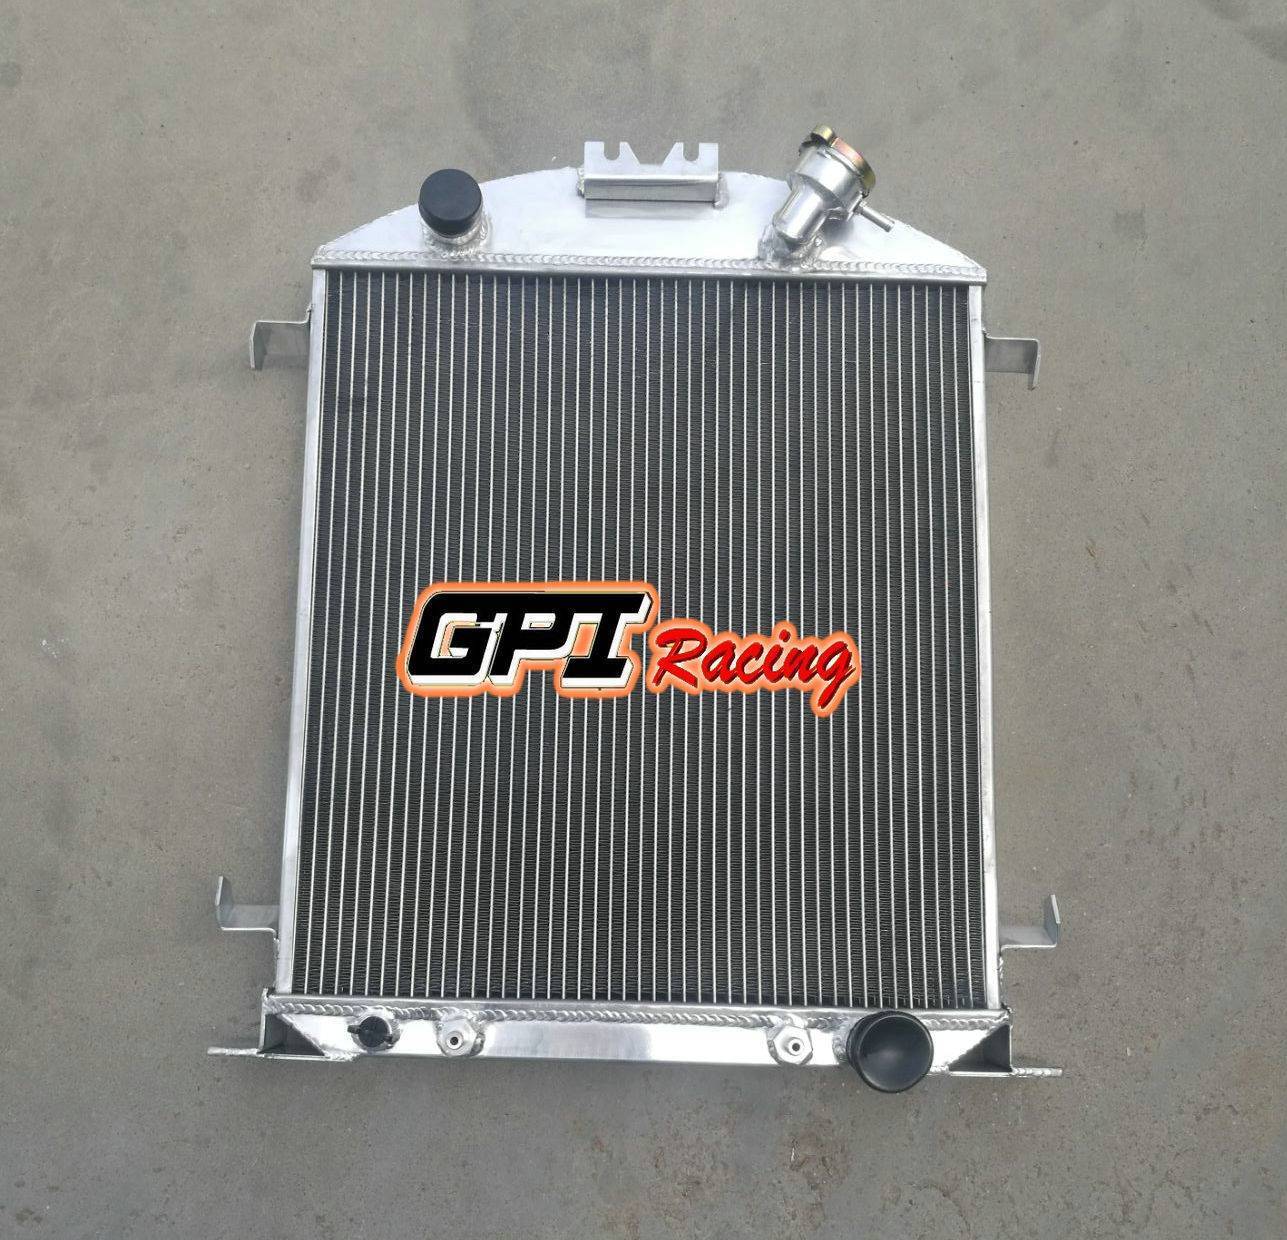 Aluminum Alloy Radiator Ford Model A W/Chevy 350 V8 Engine A/T 1928-1929 29 28